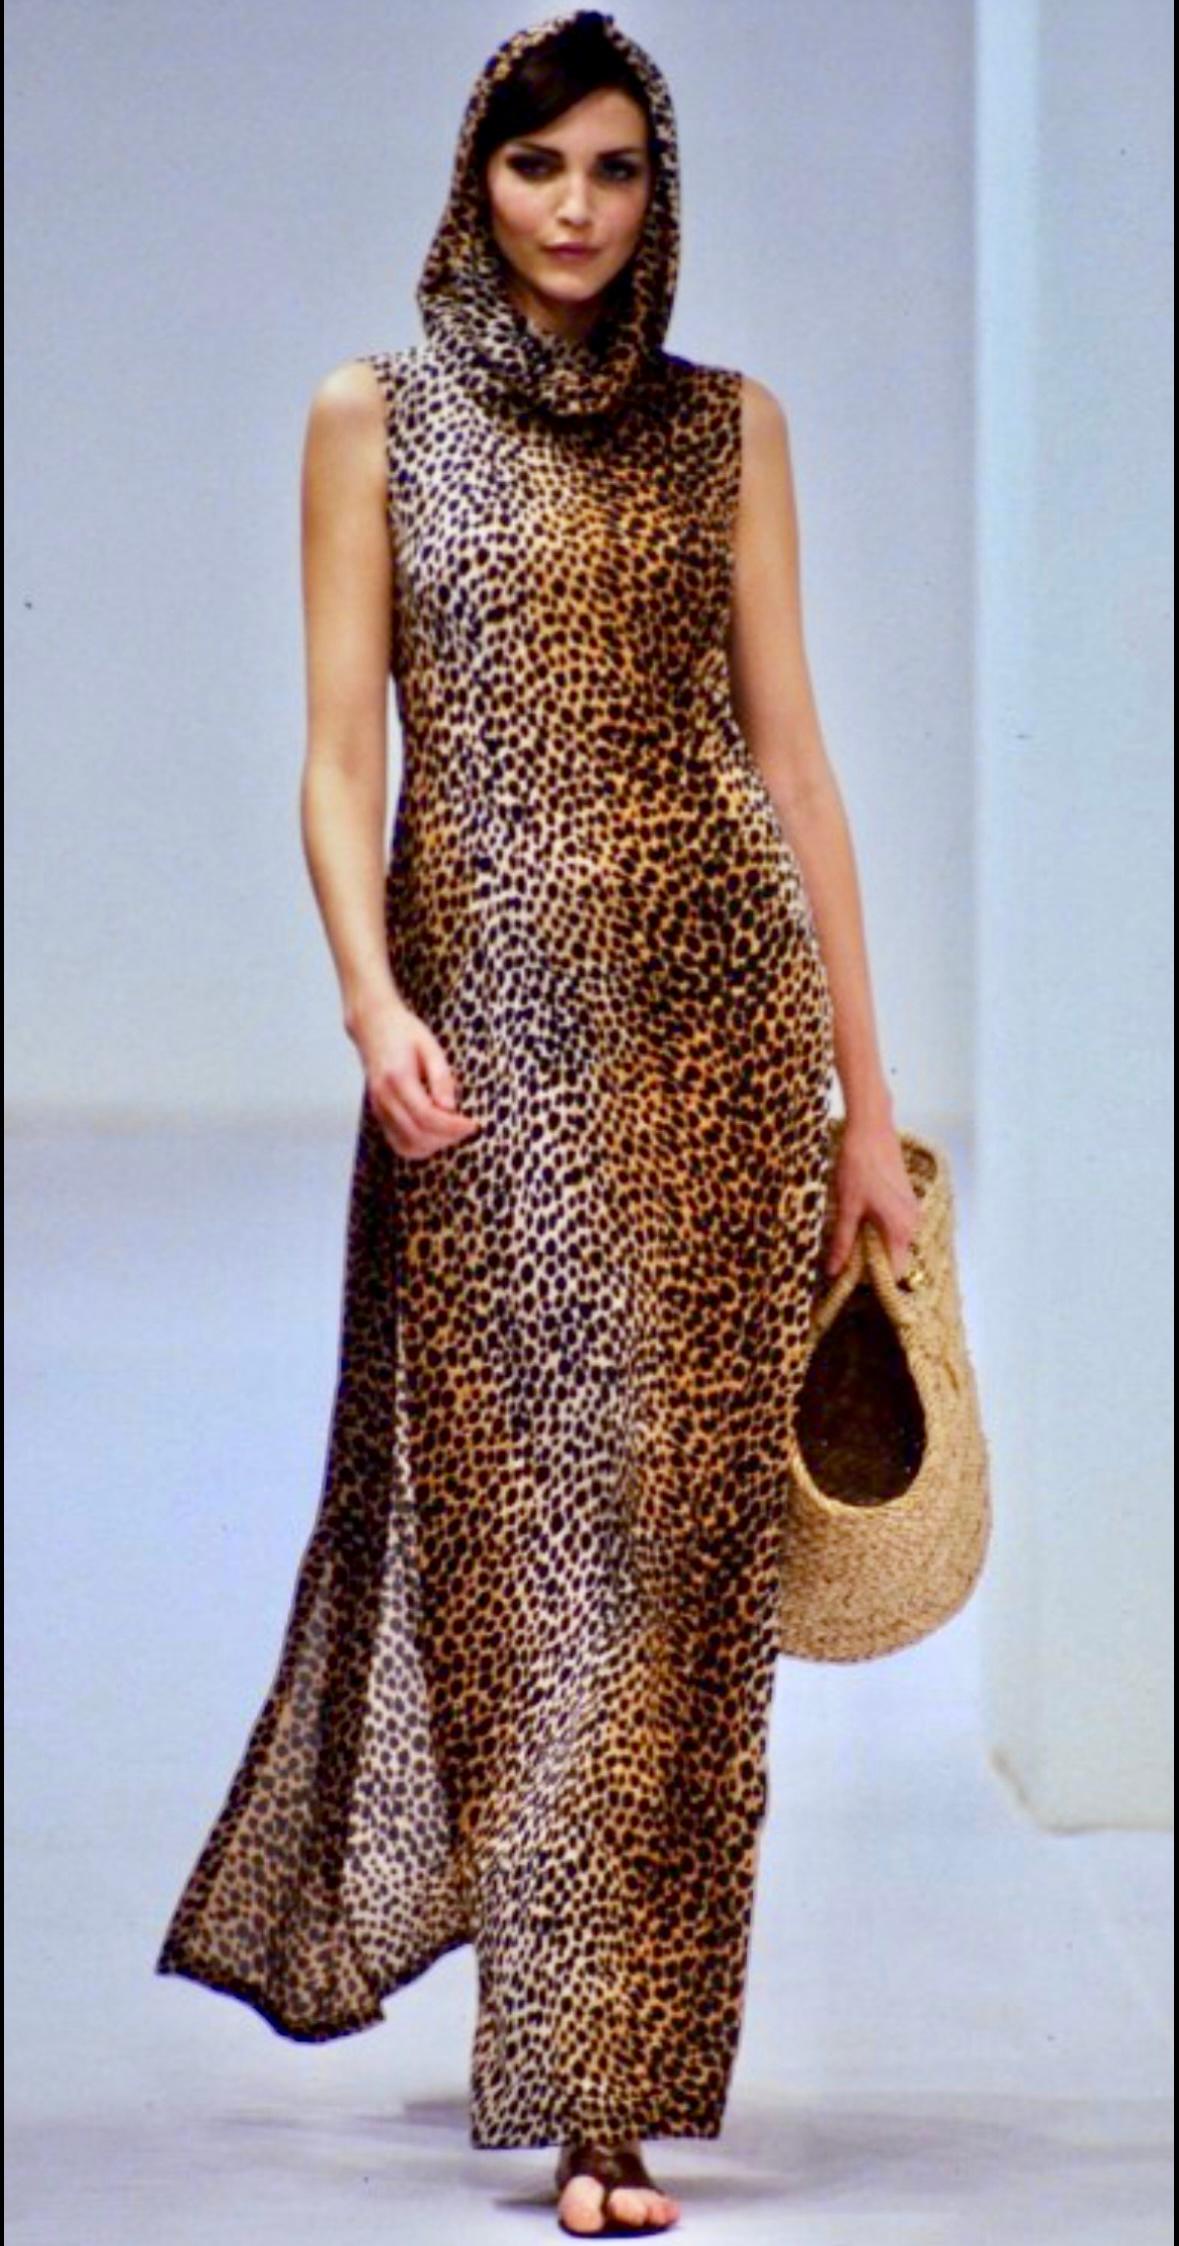 Presenting a fabulous cheetah print hooded Dolce and Gabbana dress from the Spring/Summer 1996 collection. A similar look debuted on the season’s runway, modeled by Nadja Auermann, and appeared in the season’s ad campaign on Linda Evangelista,